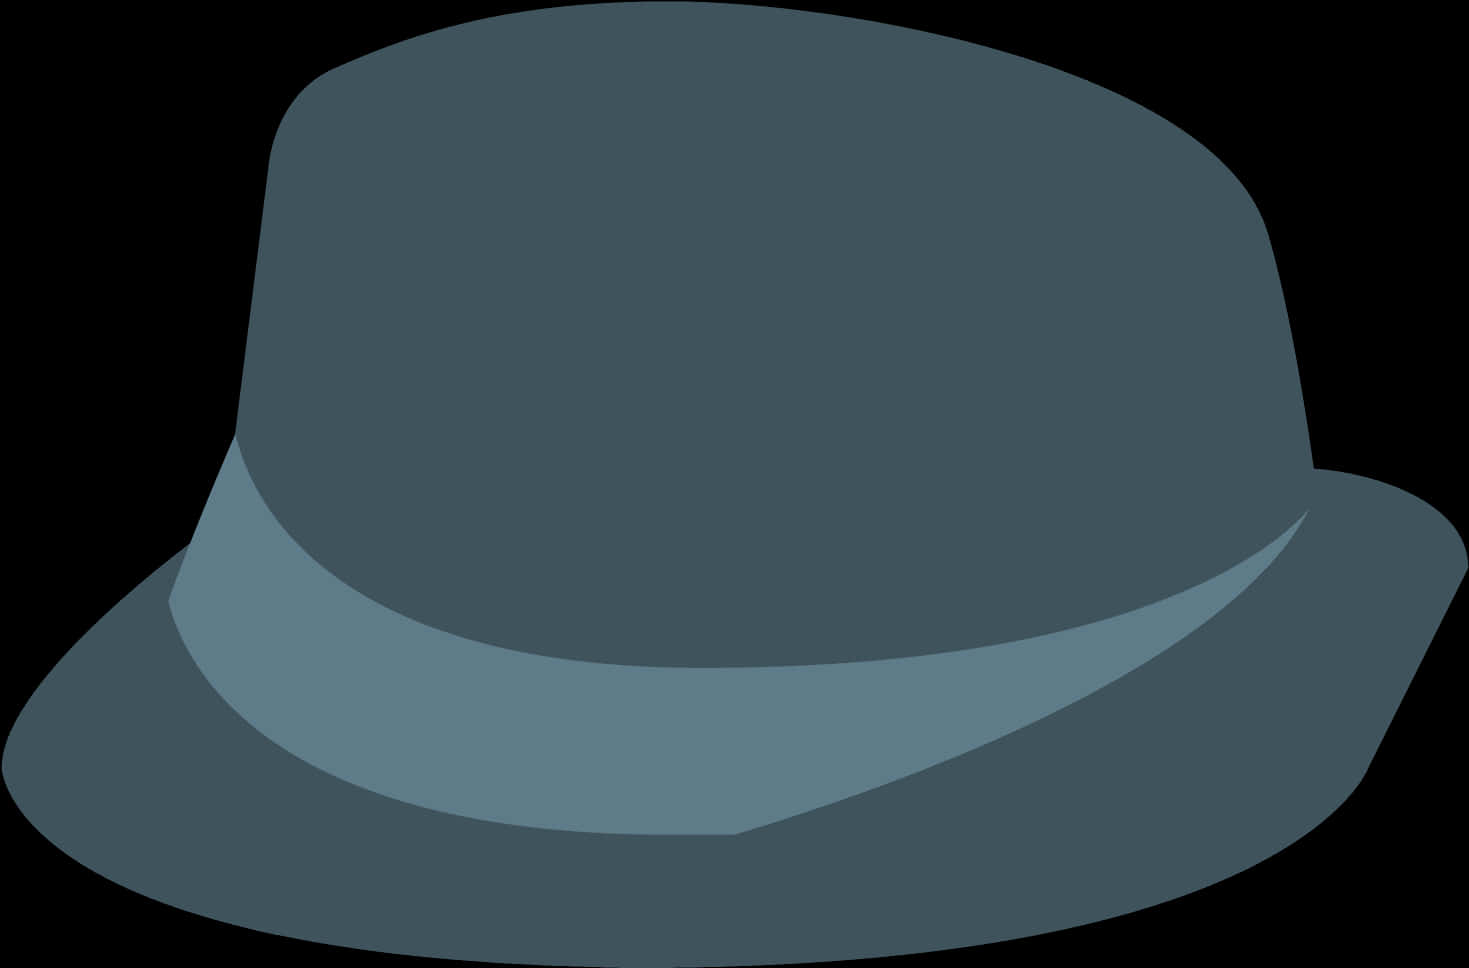 Classic Fedora Hat Vector PNG image